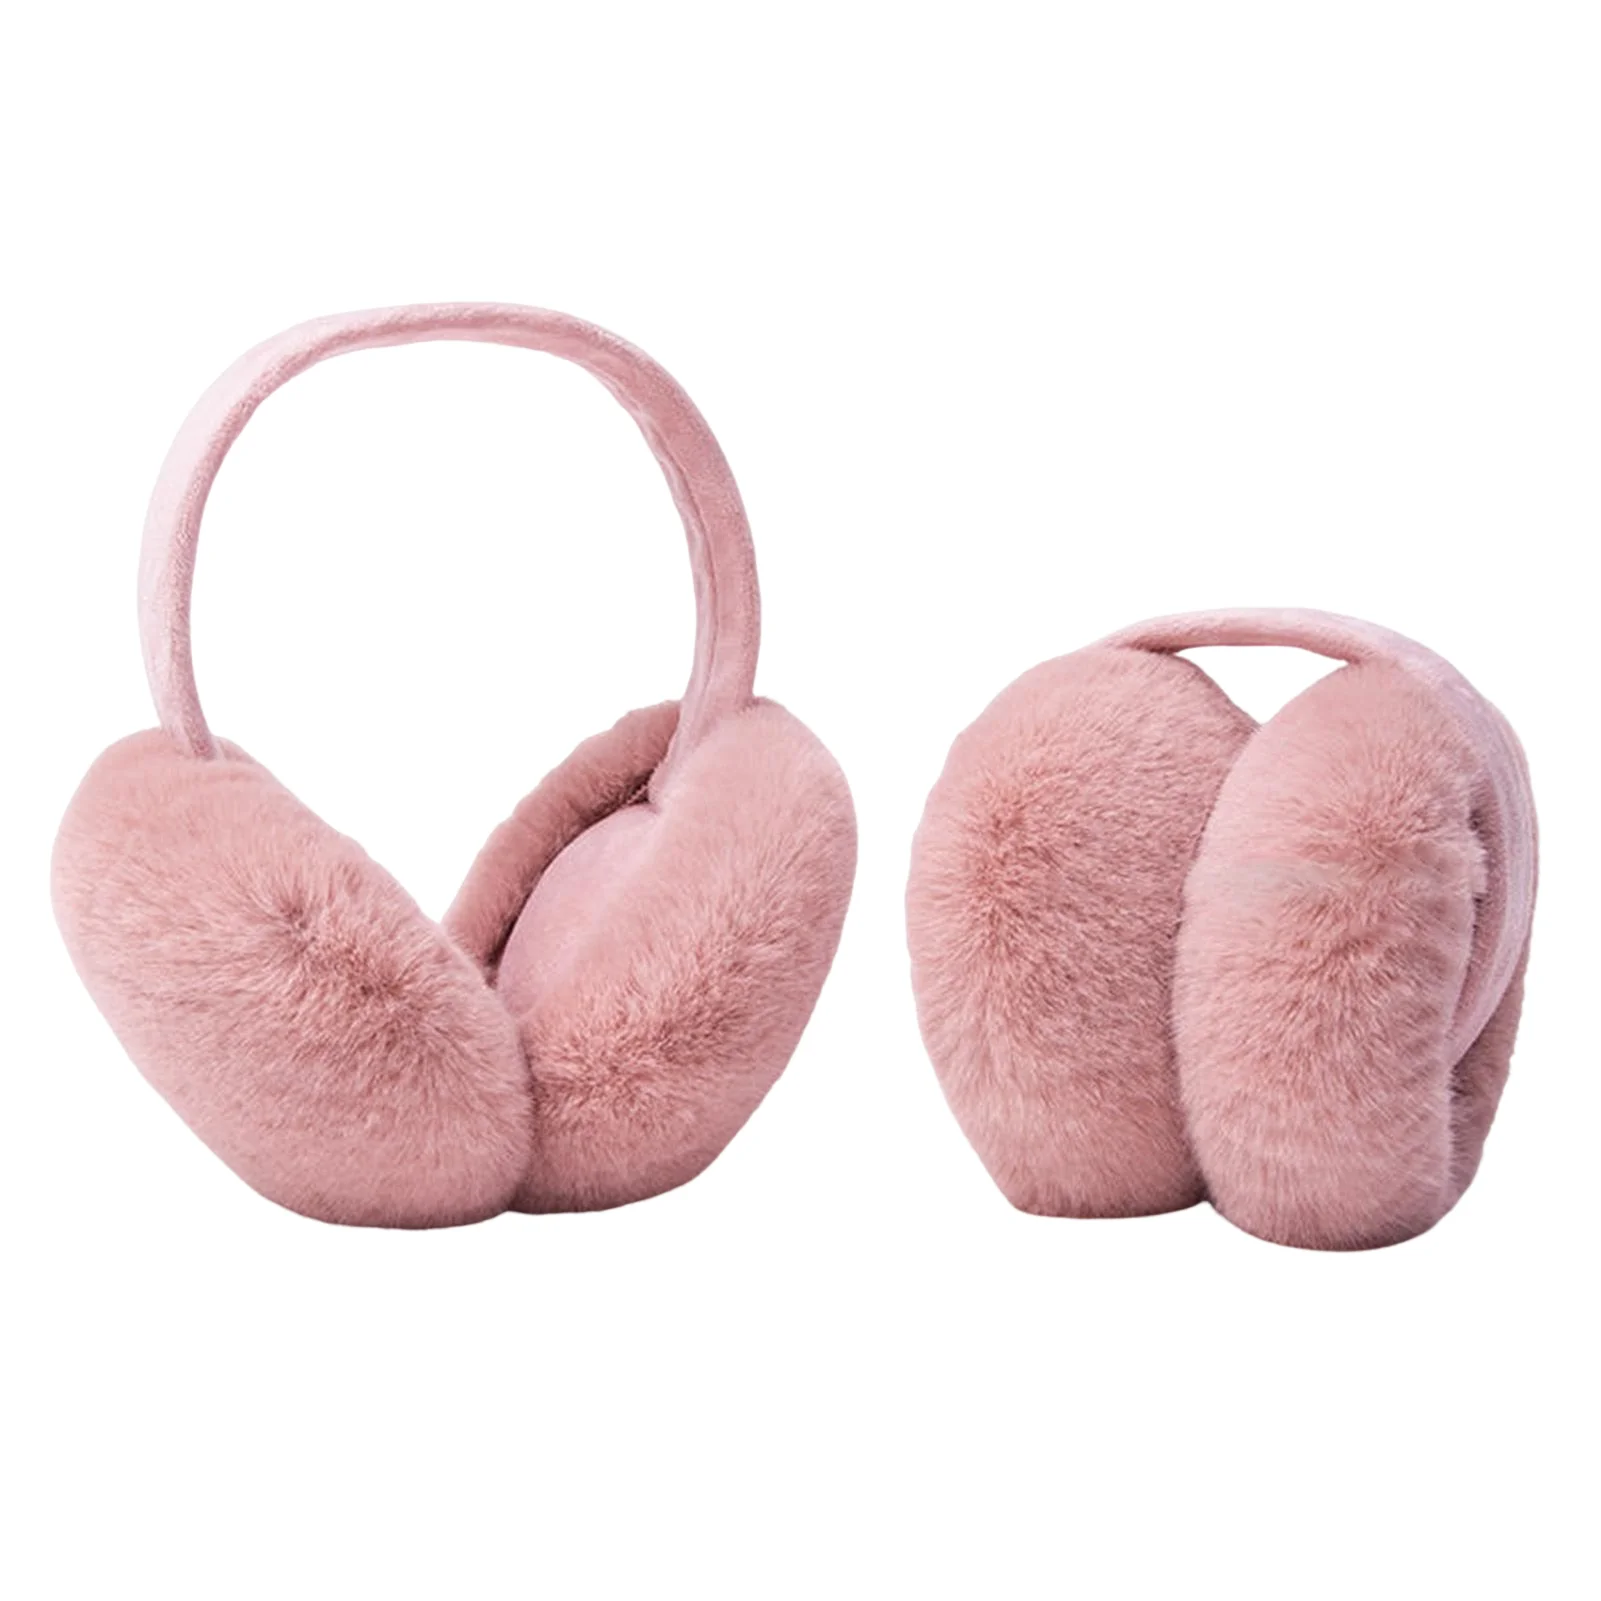 

Fluffy Lightweight Ear Wamer with Classic All-Matching Design Great Gift for Sister Wife Girlfriend